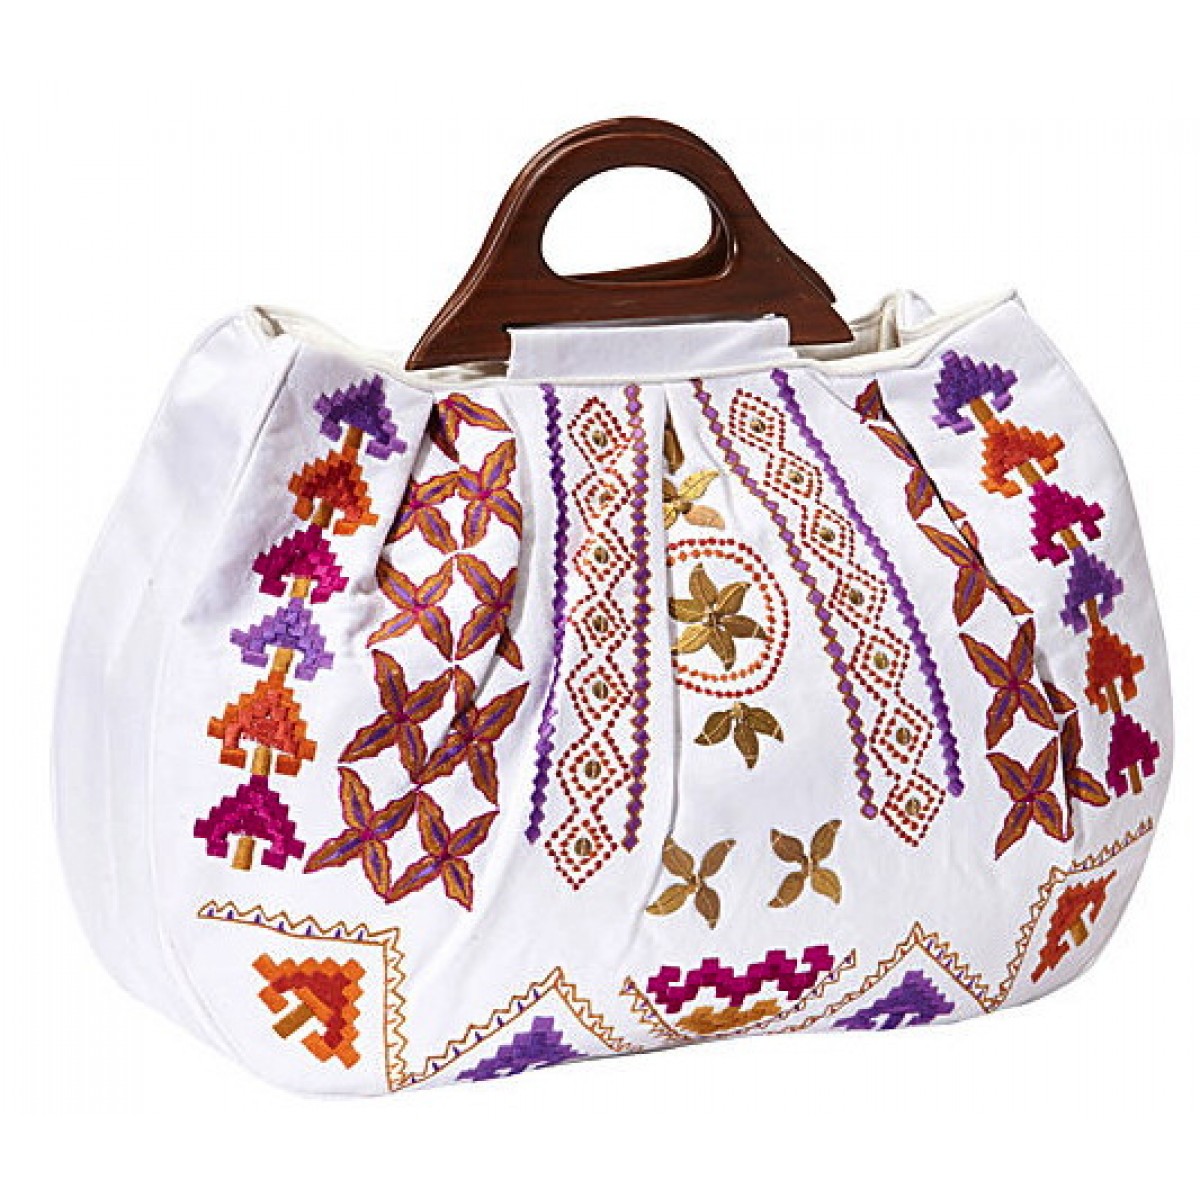 Canvas Tote with Embroidered and Beaded Embellishments